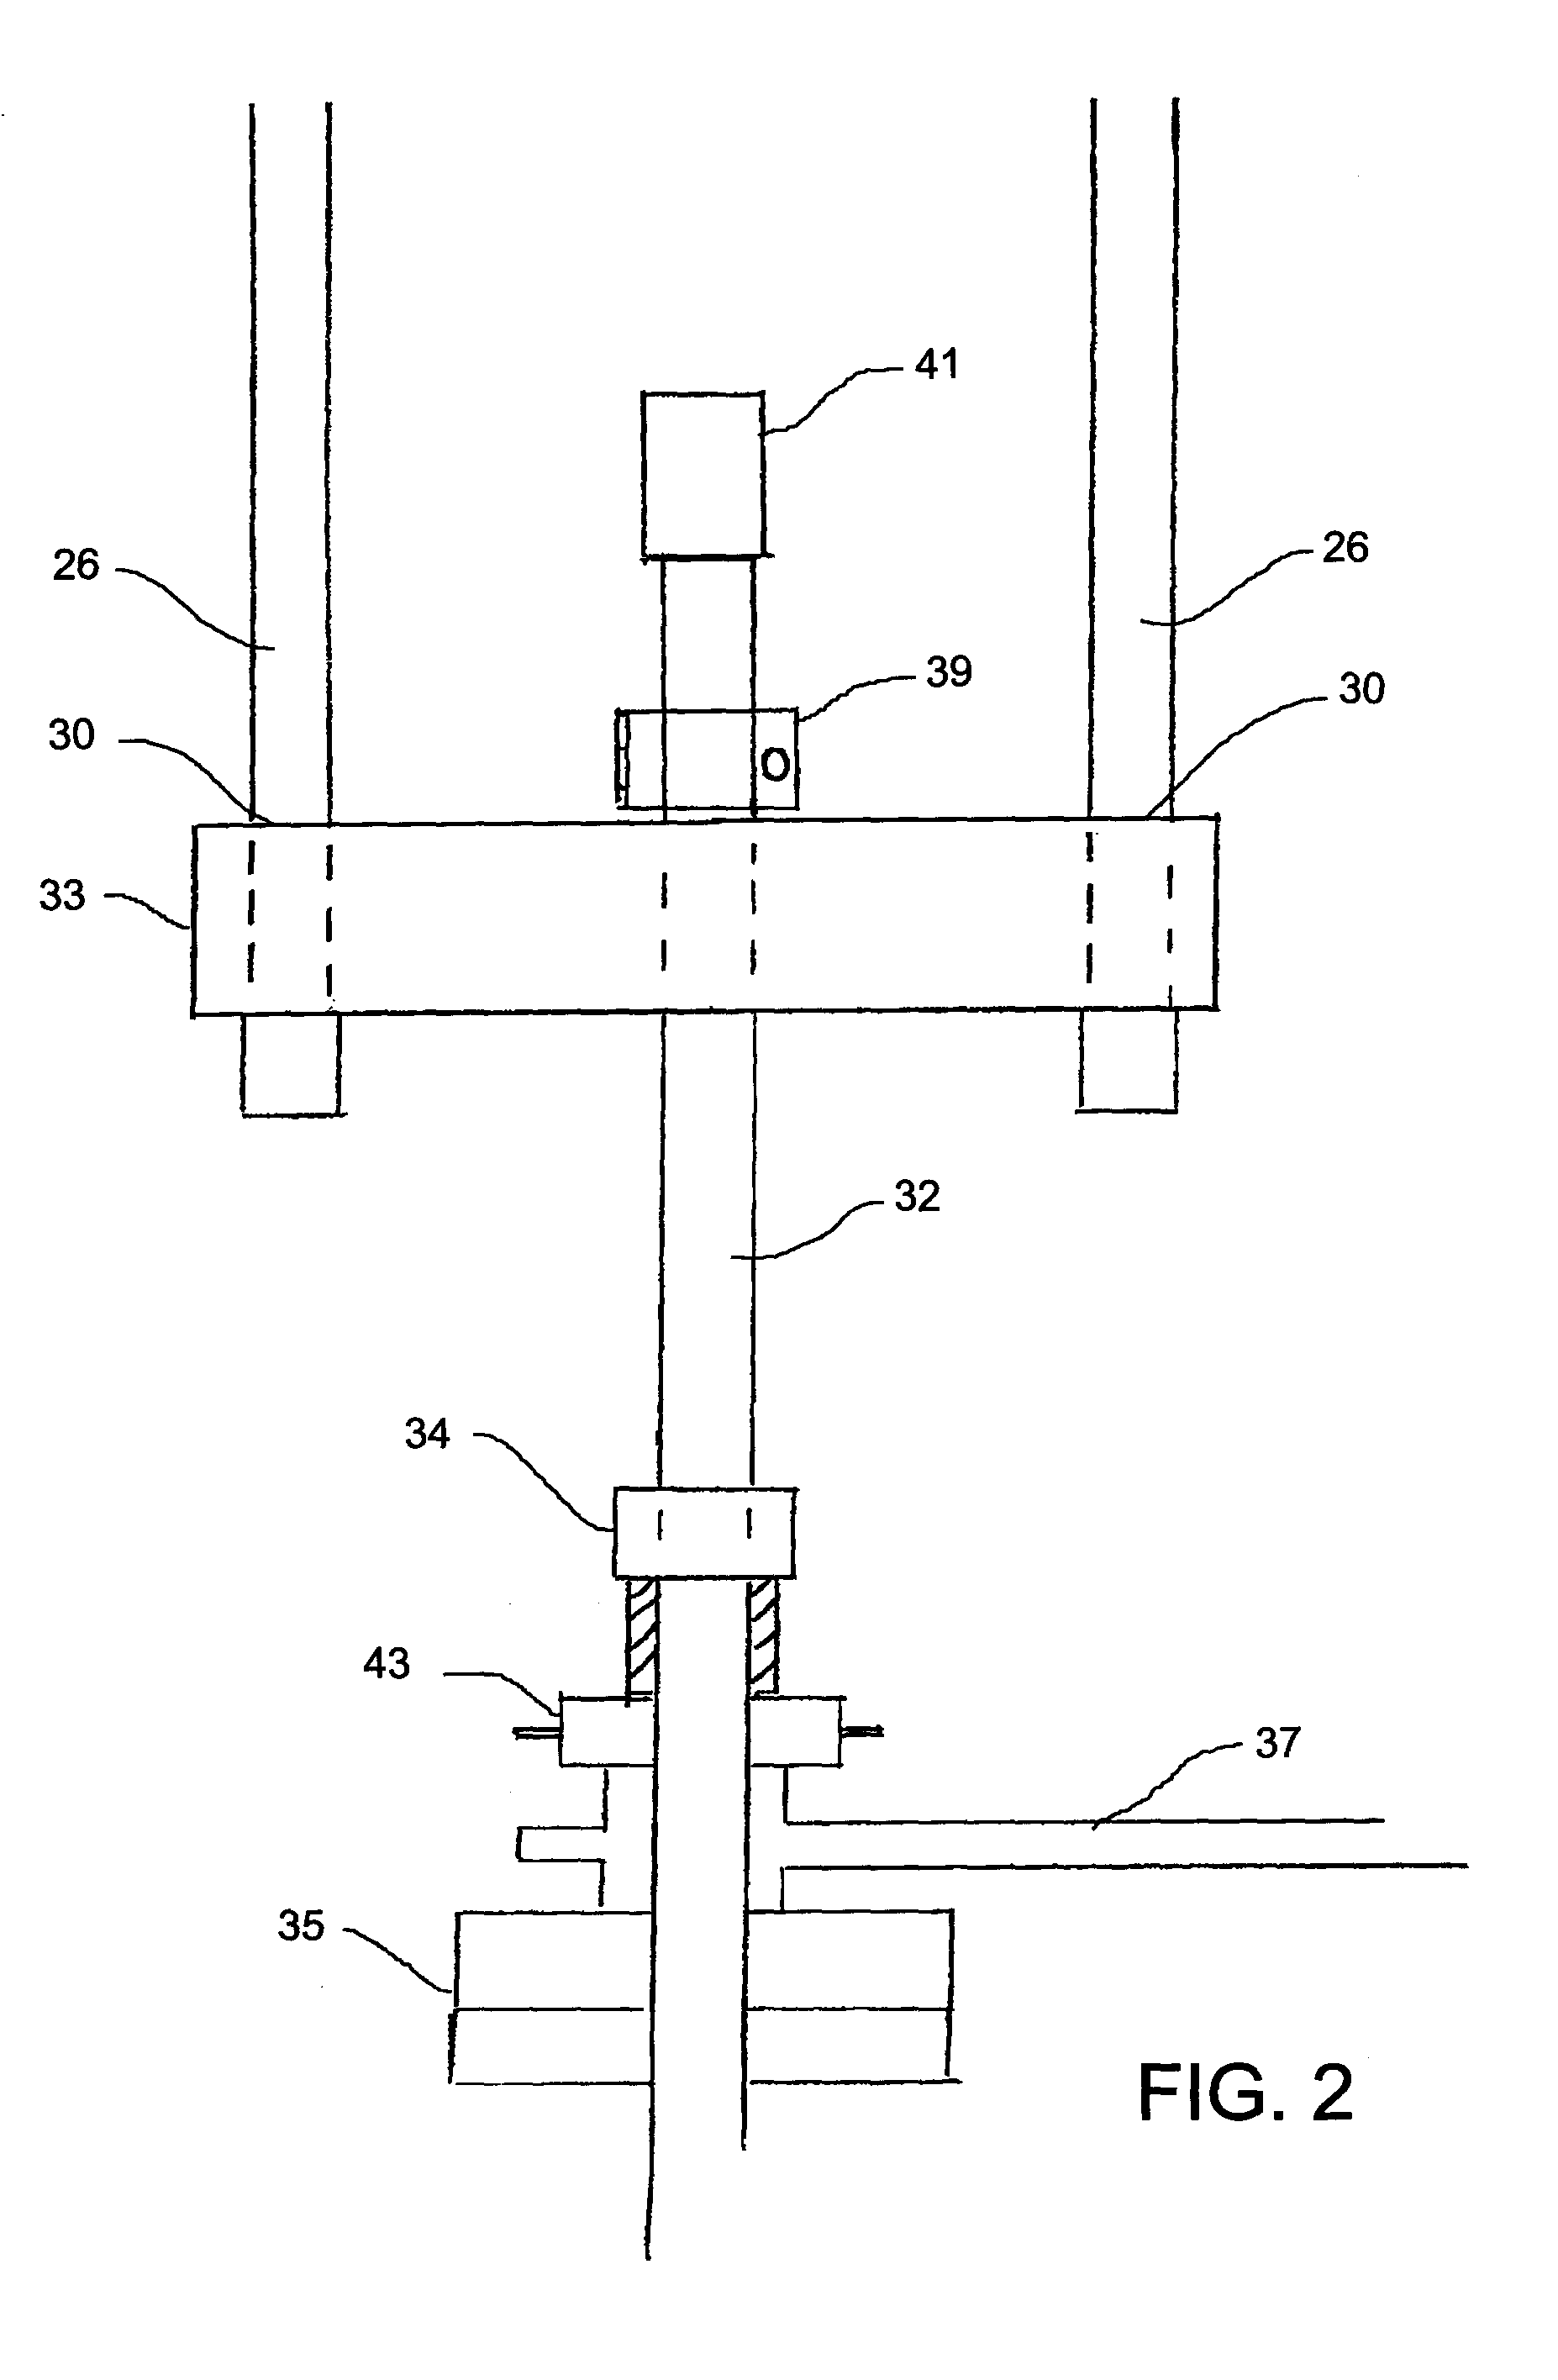 Drive assembly for a reciprocating pump utilizing a linear actuator